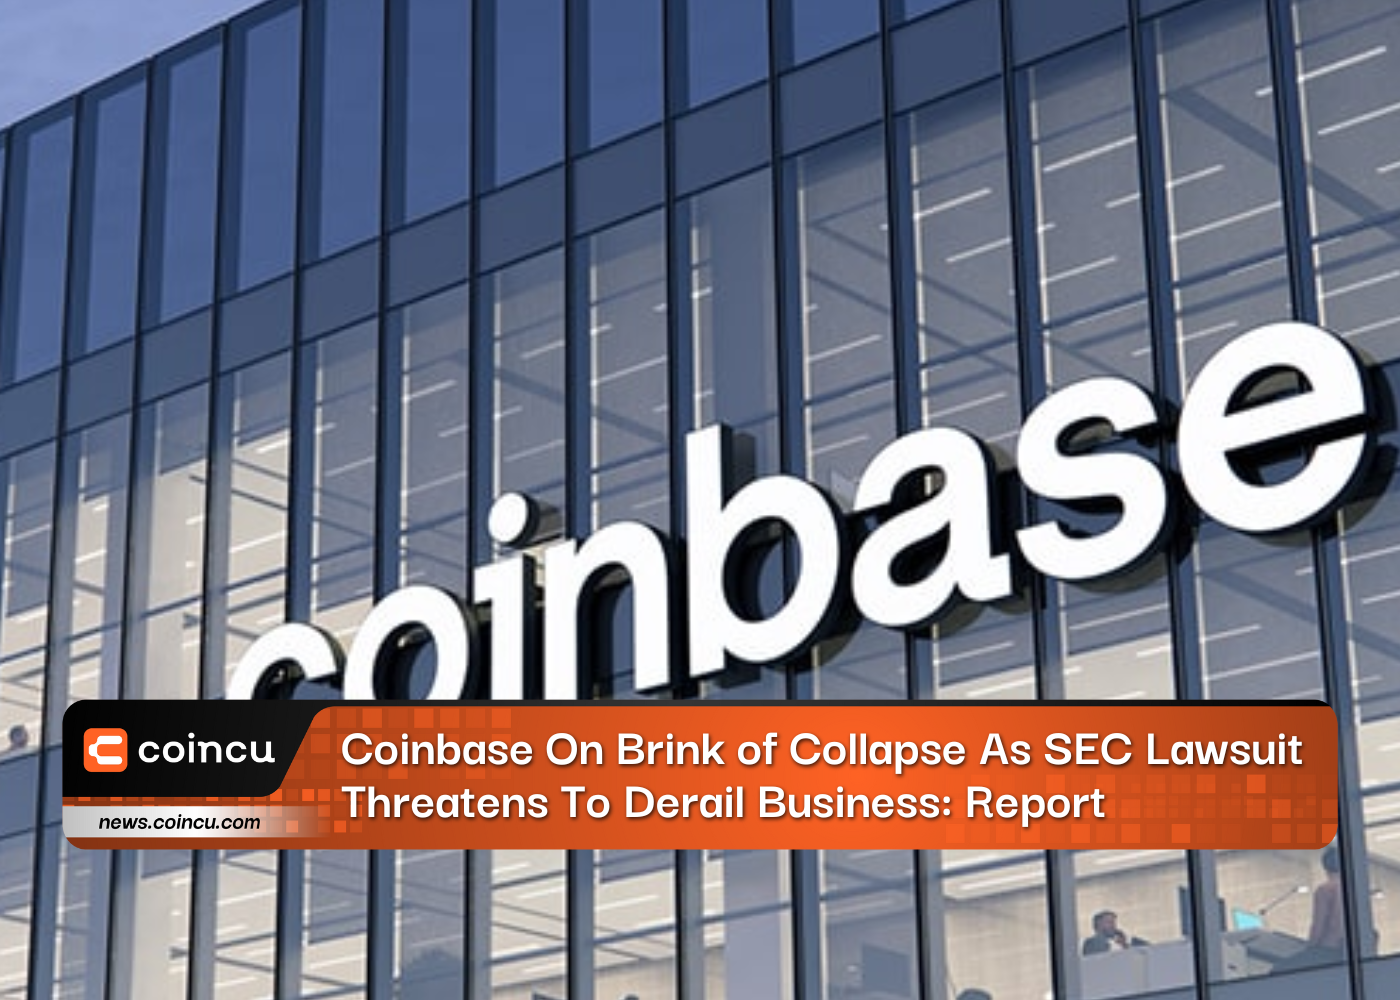 Coinbase On Brink of Collapse As SEC Lawsuit Threatens To Derail Business: Report